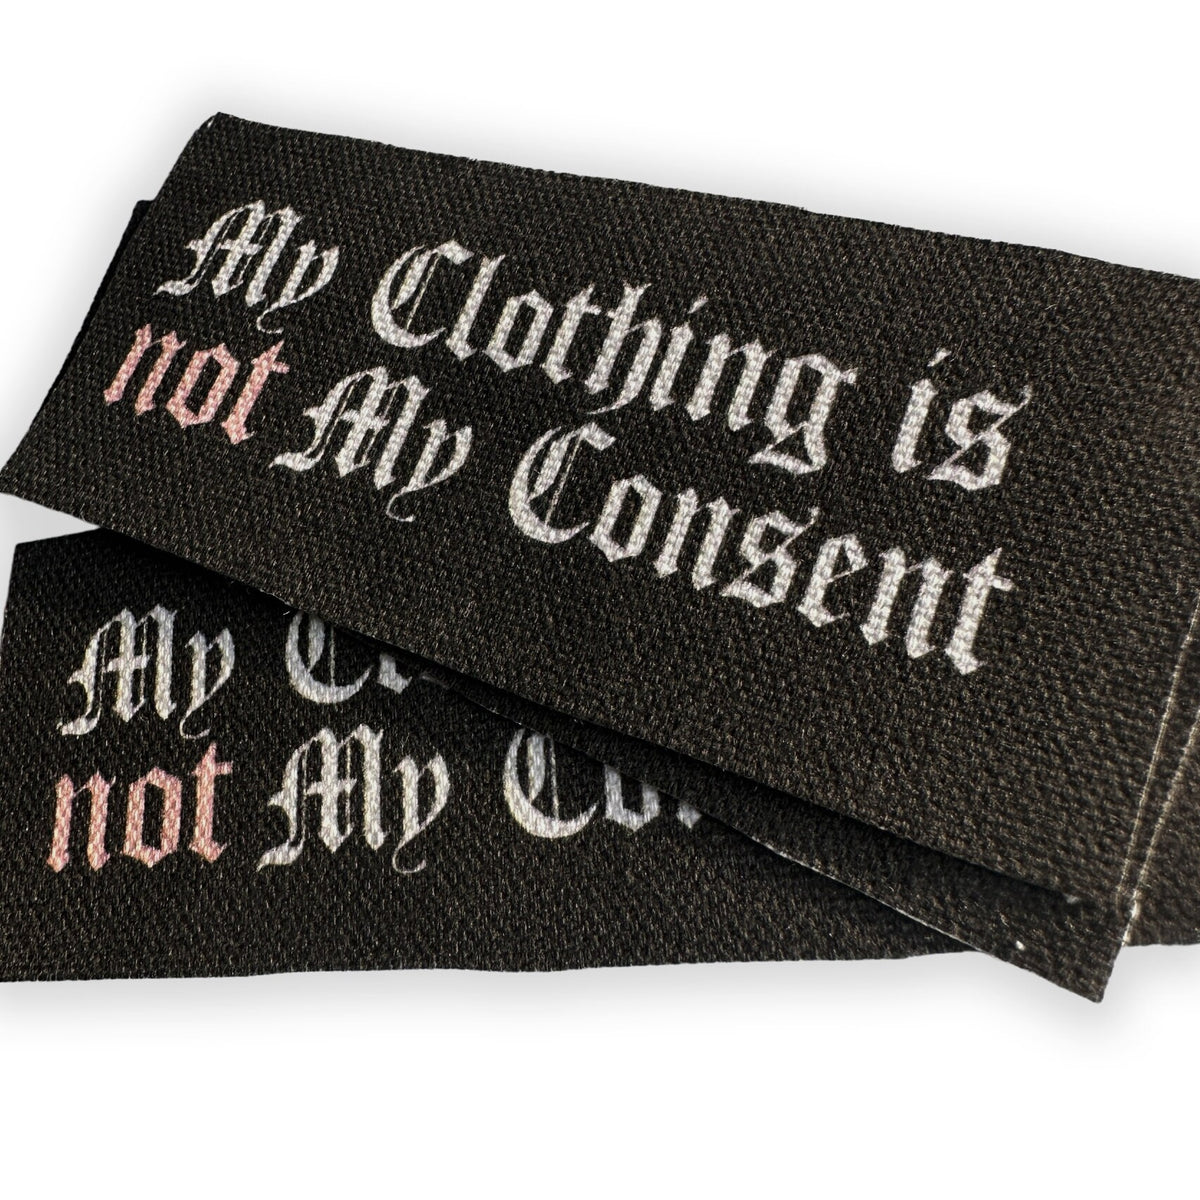 Consent Sewn On Patch | Punk Feminist Accessories DIY Handmade Horror Fabric Patches | My Clothing is Not My Consent | 4.25x2&quot;